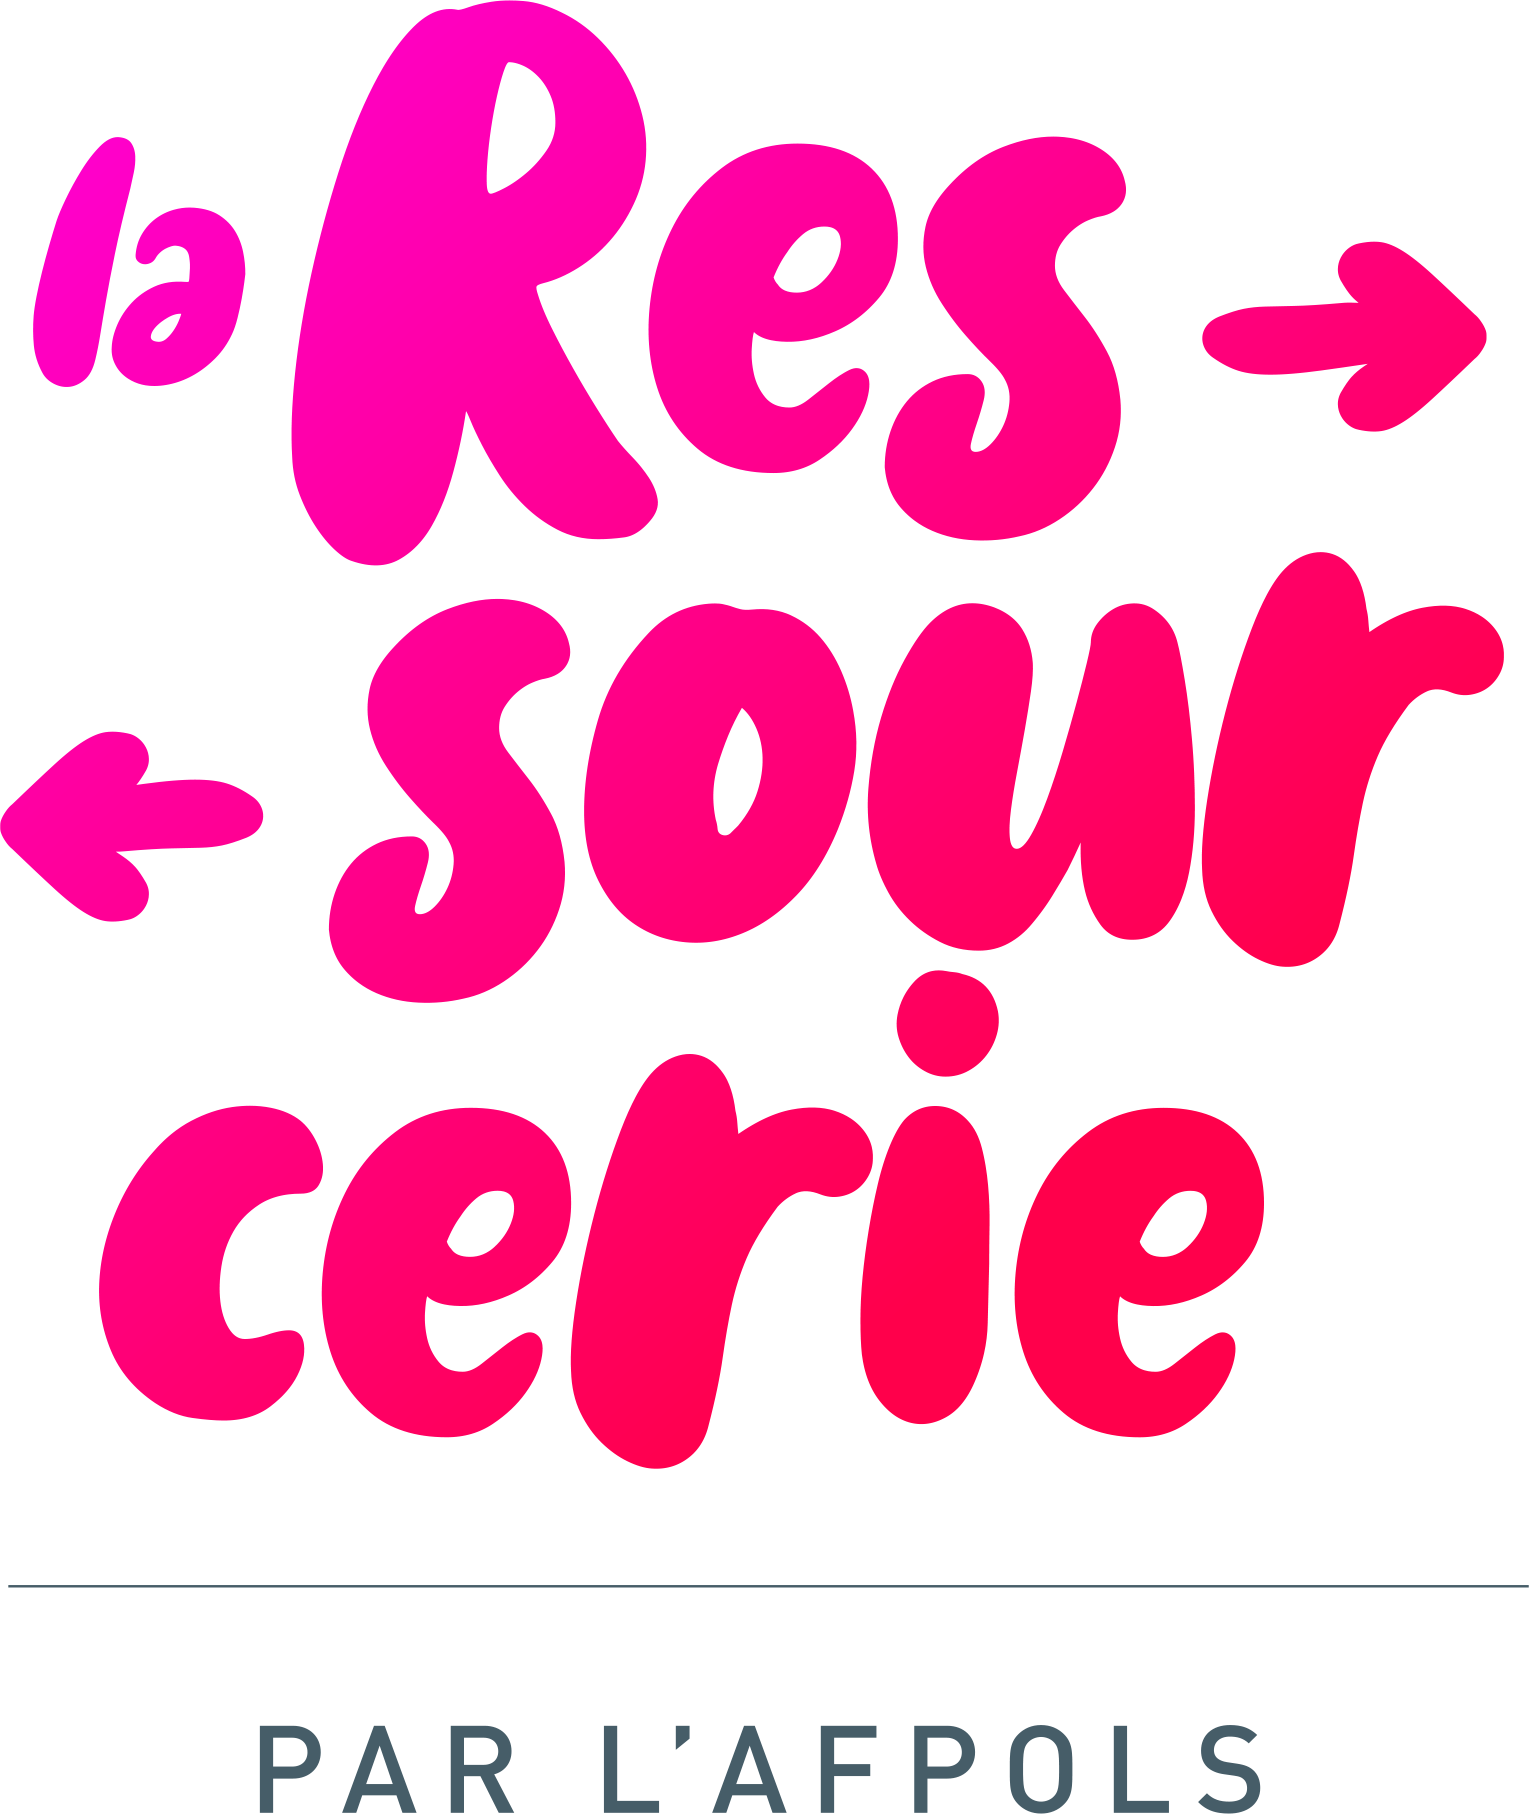 RESSOURCERIE-RVB-POSITIF-CROPPED.png